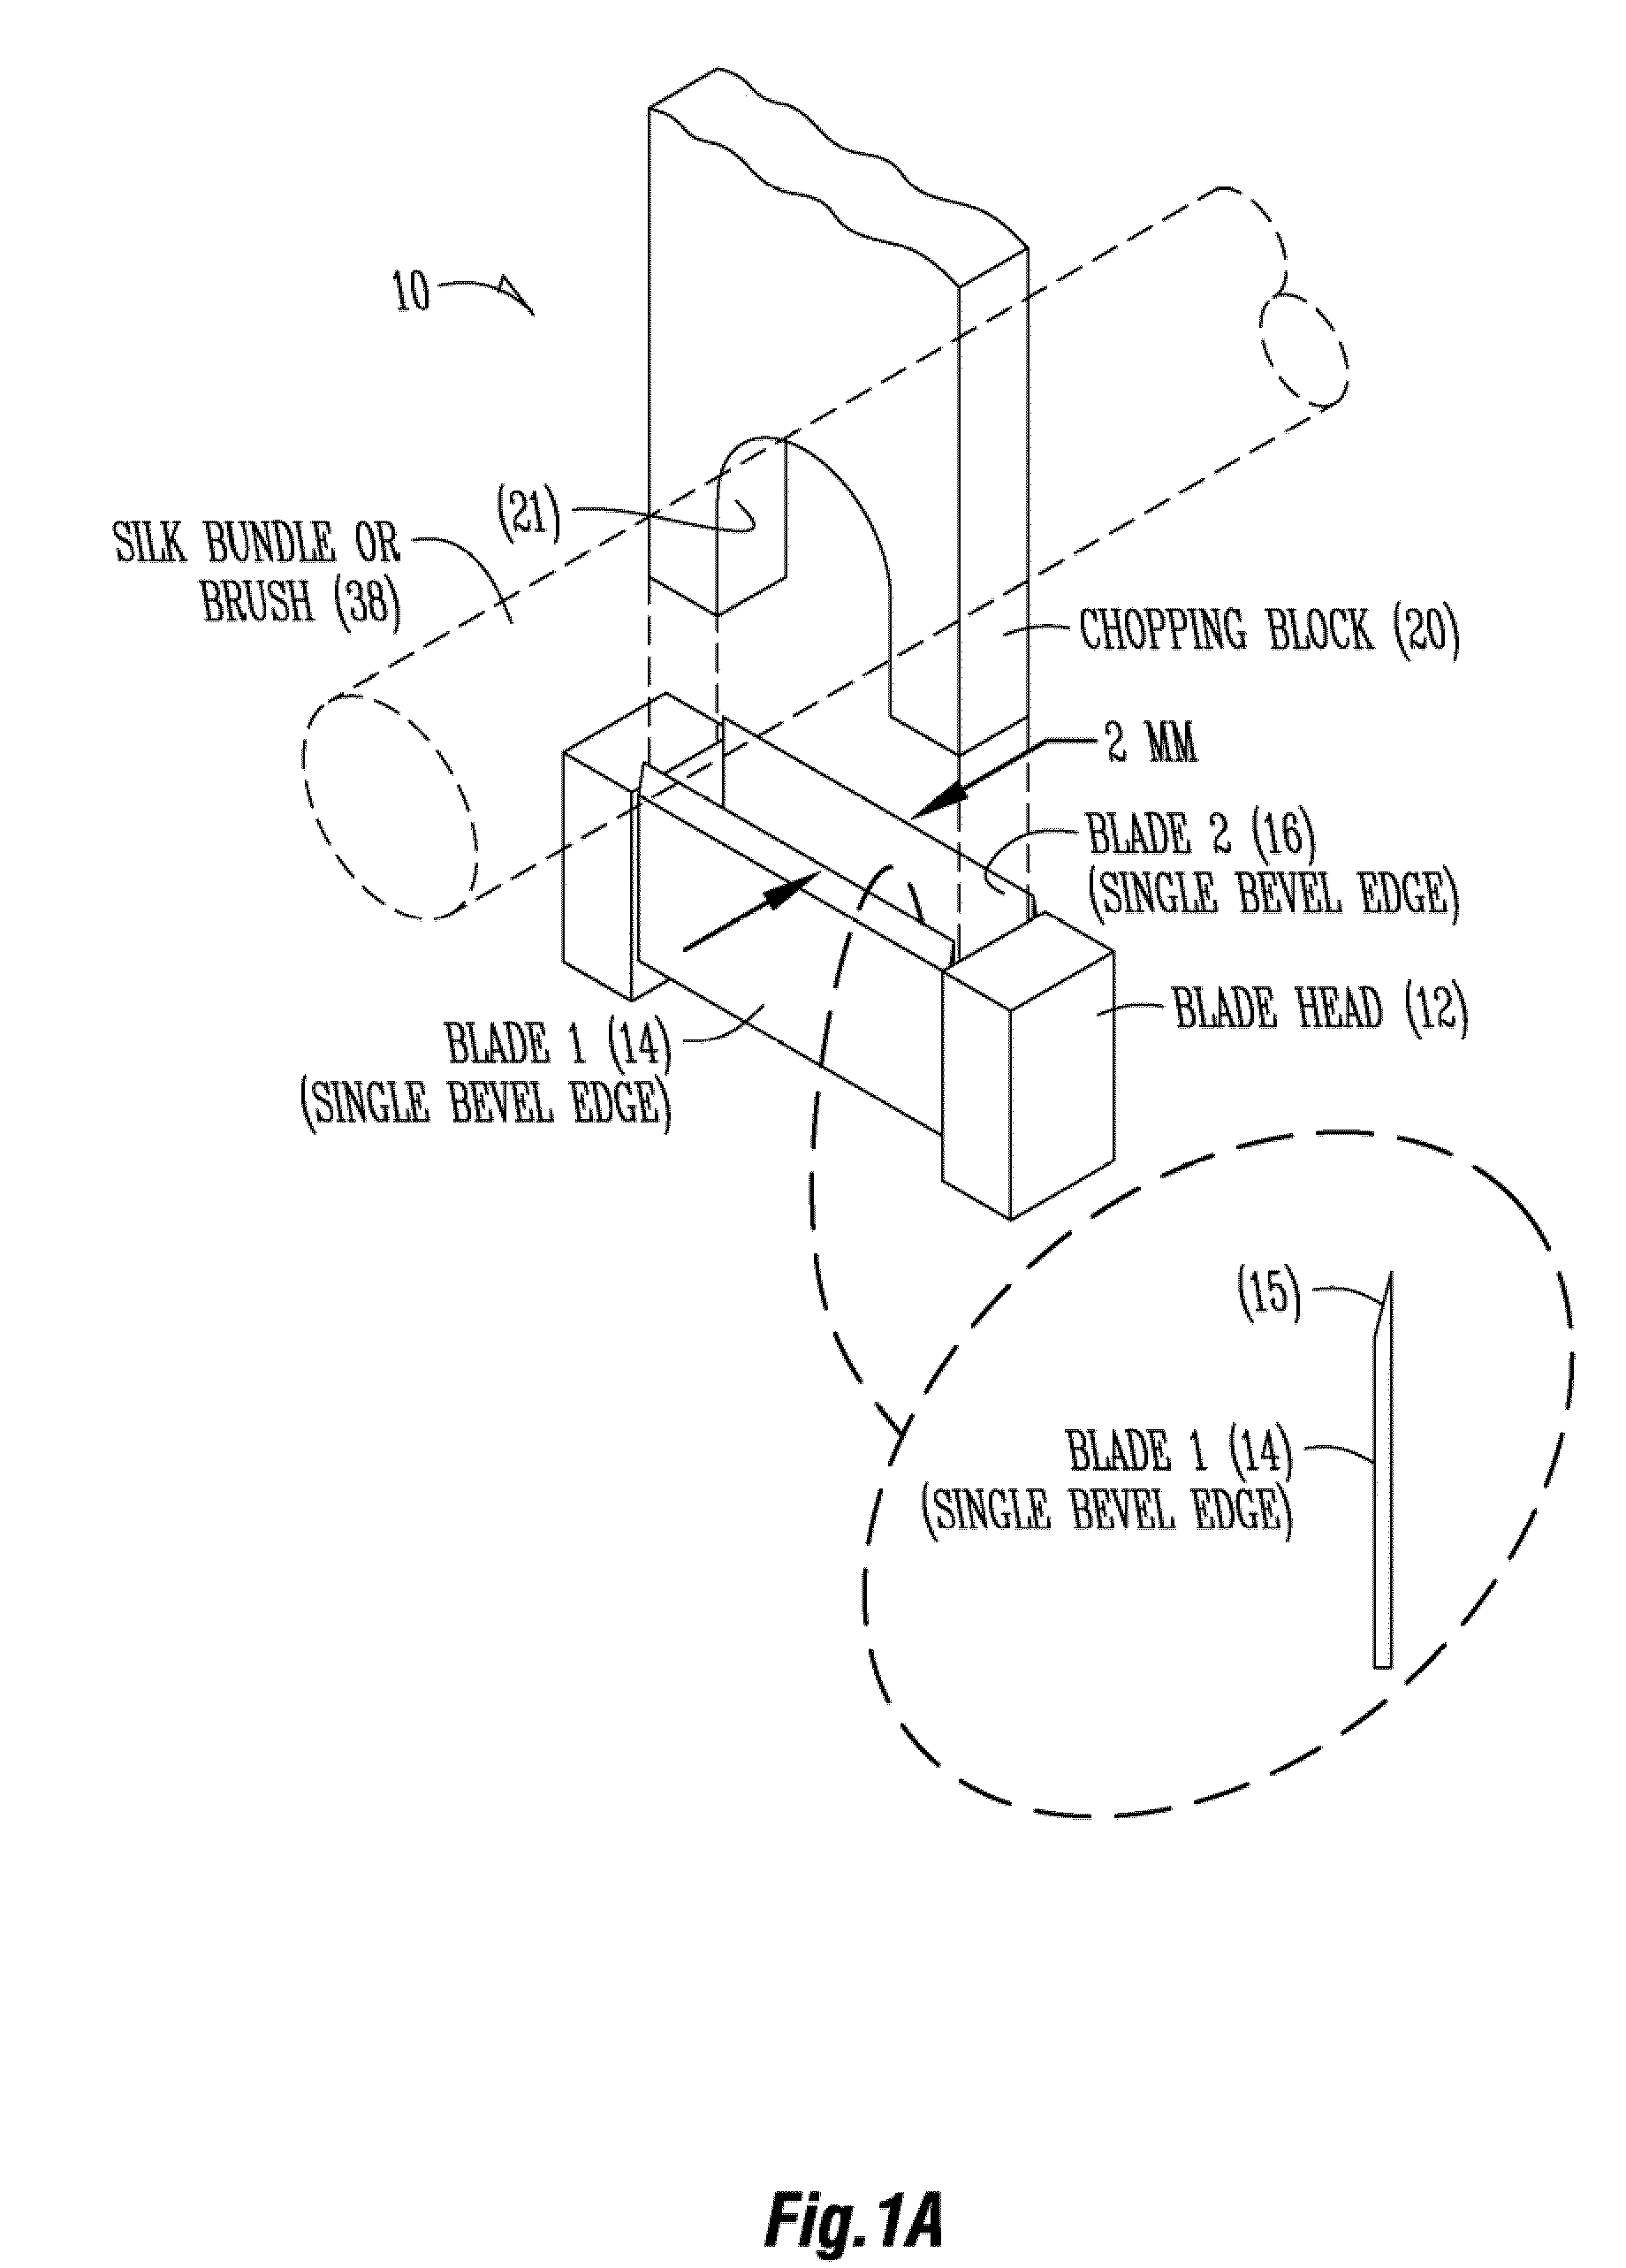 Apparatus and systems for counting corn silks or other plural elongated strands and use of the count for characterizing the strands or their origin